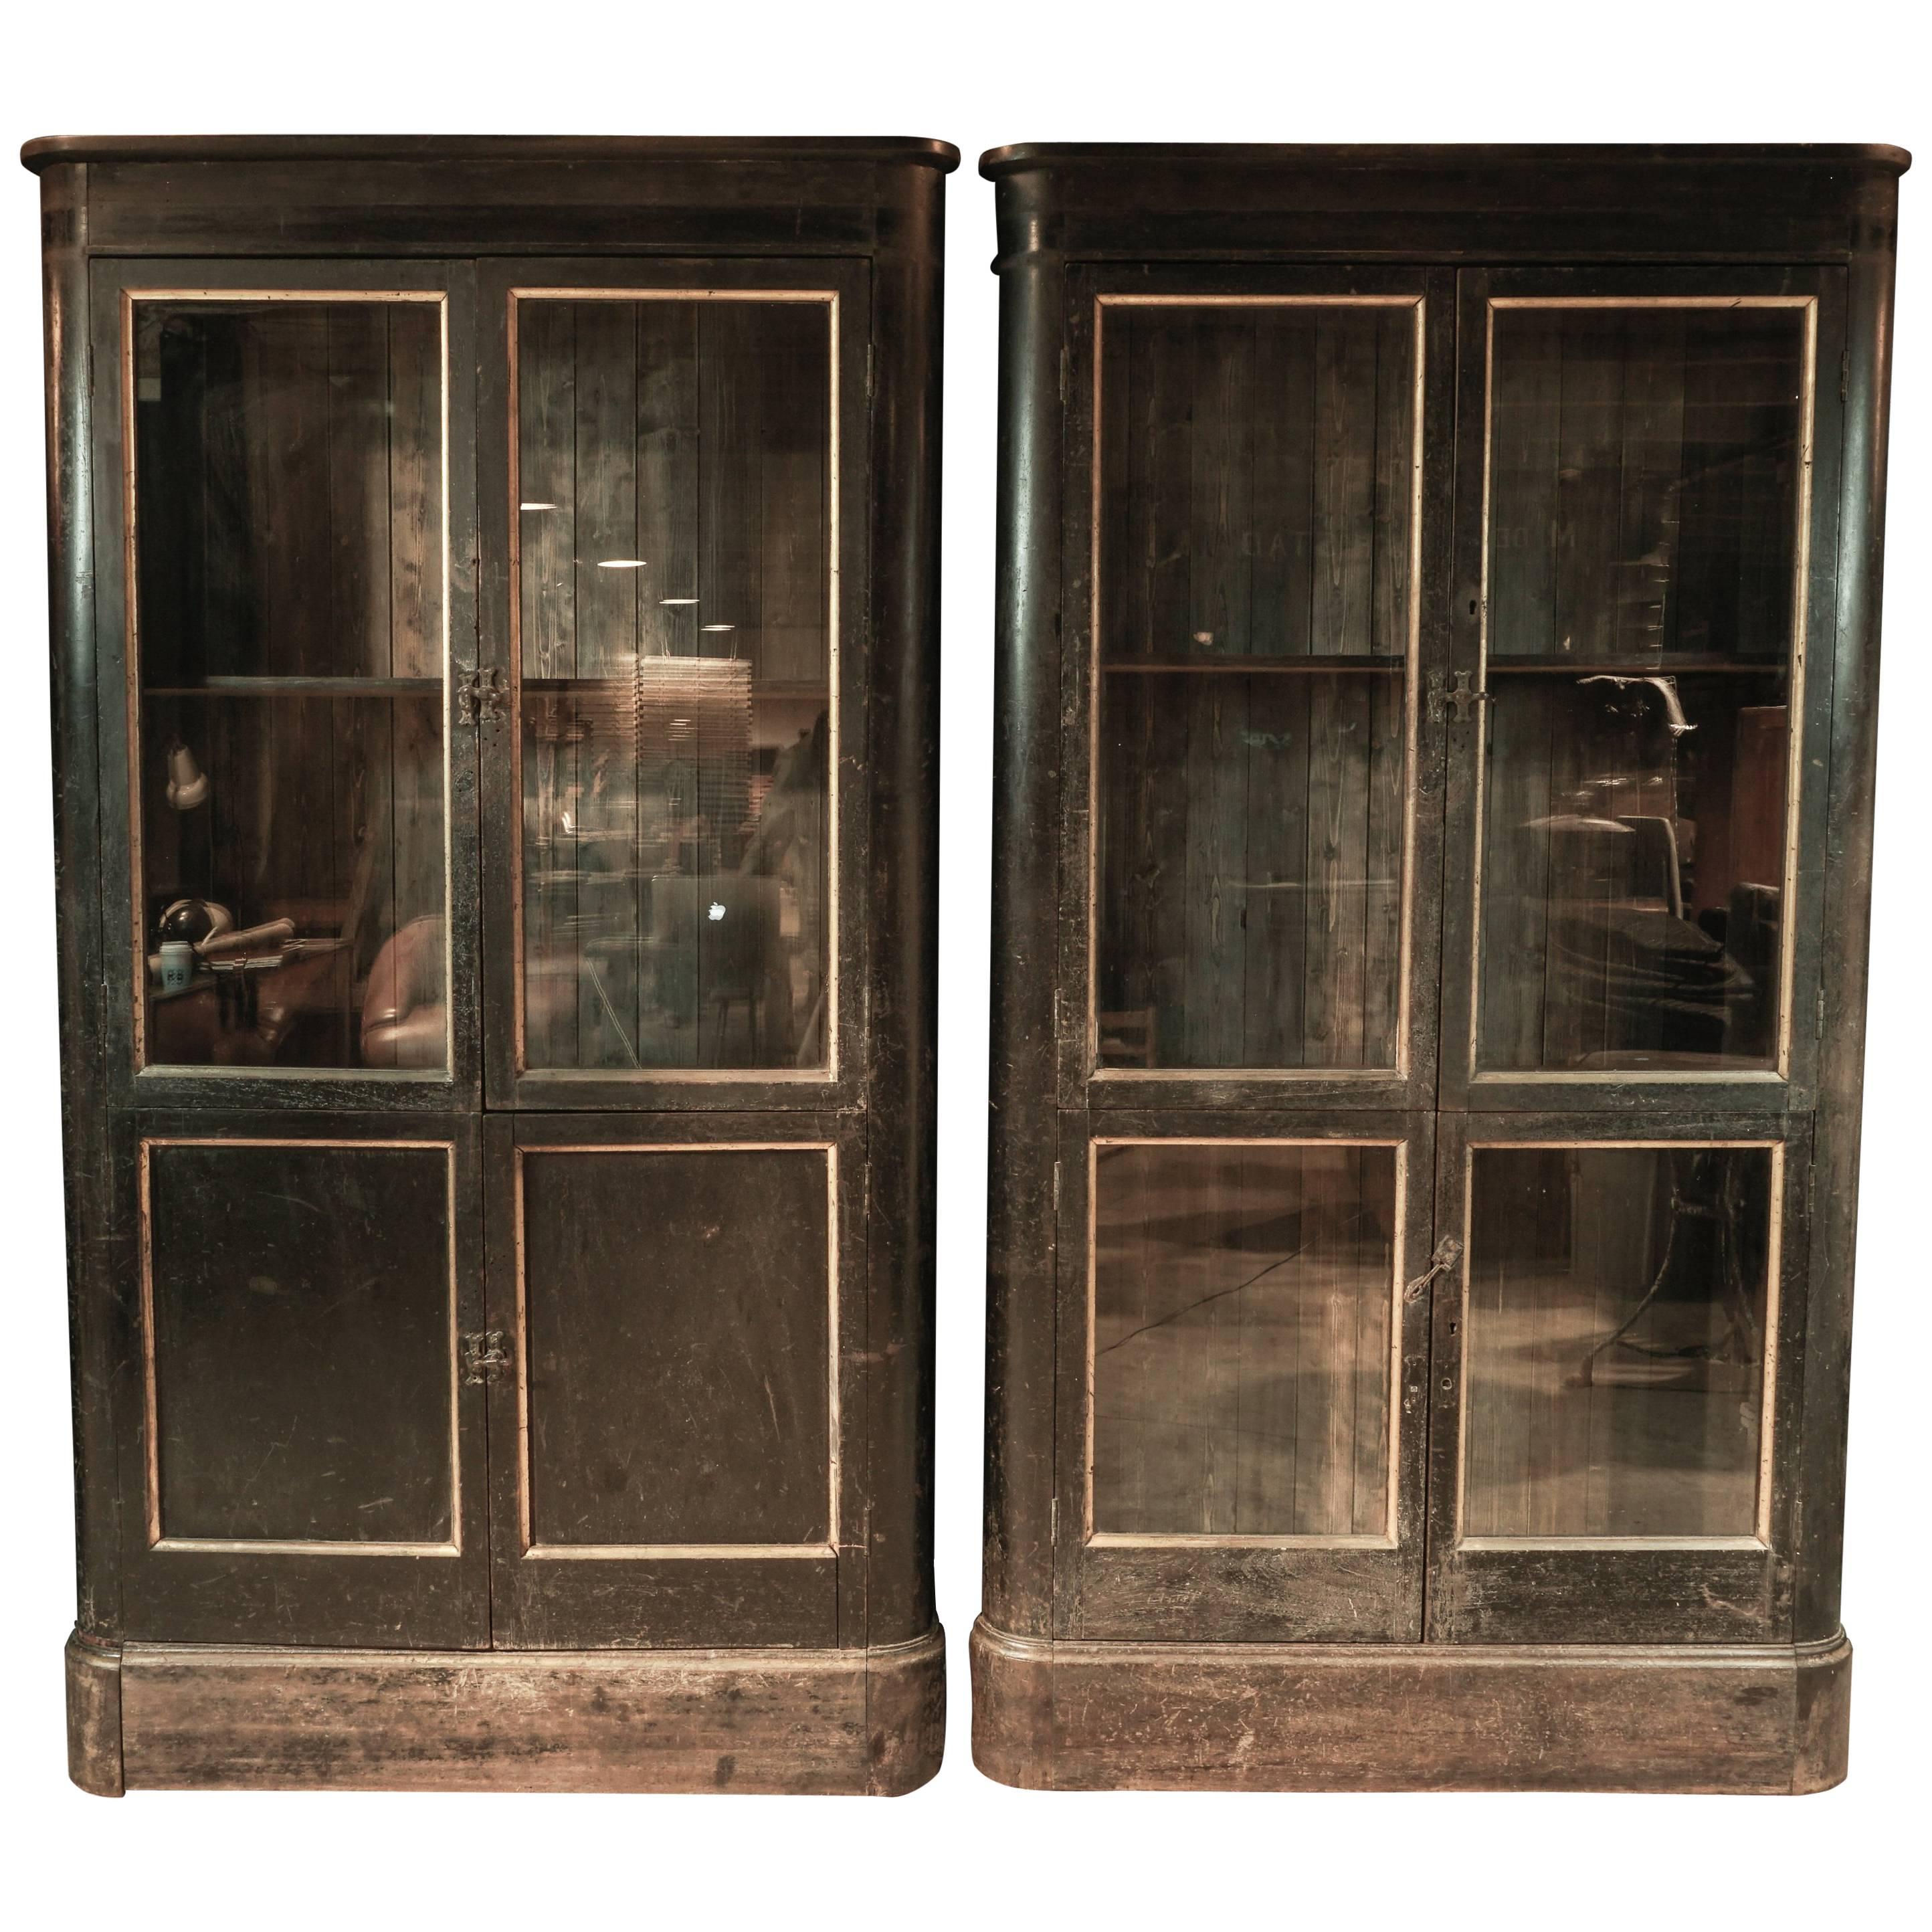 Incredible Rare Pair of Apothecary Cabinets from England, circa 1880